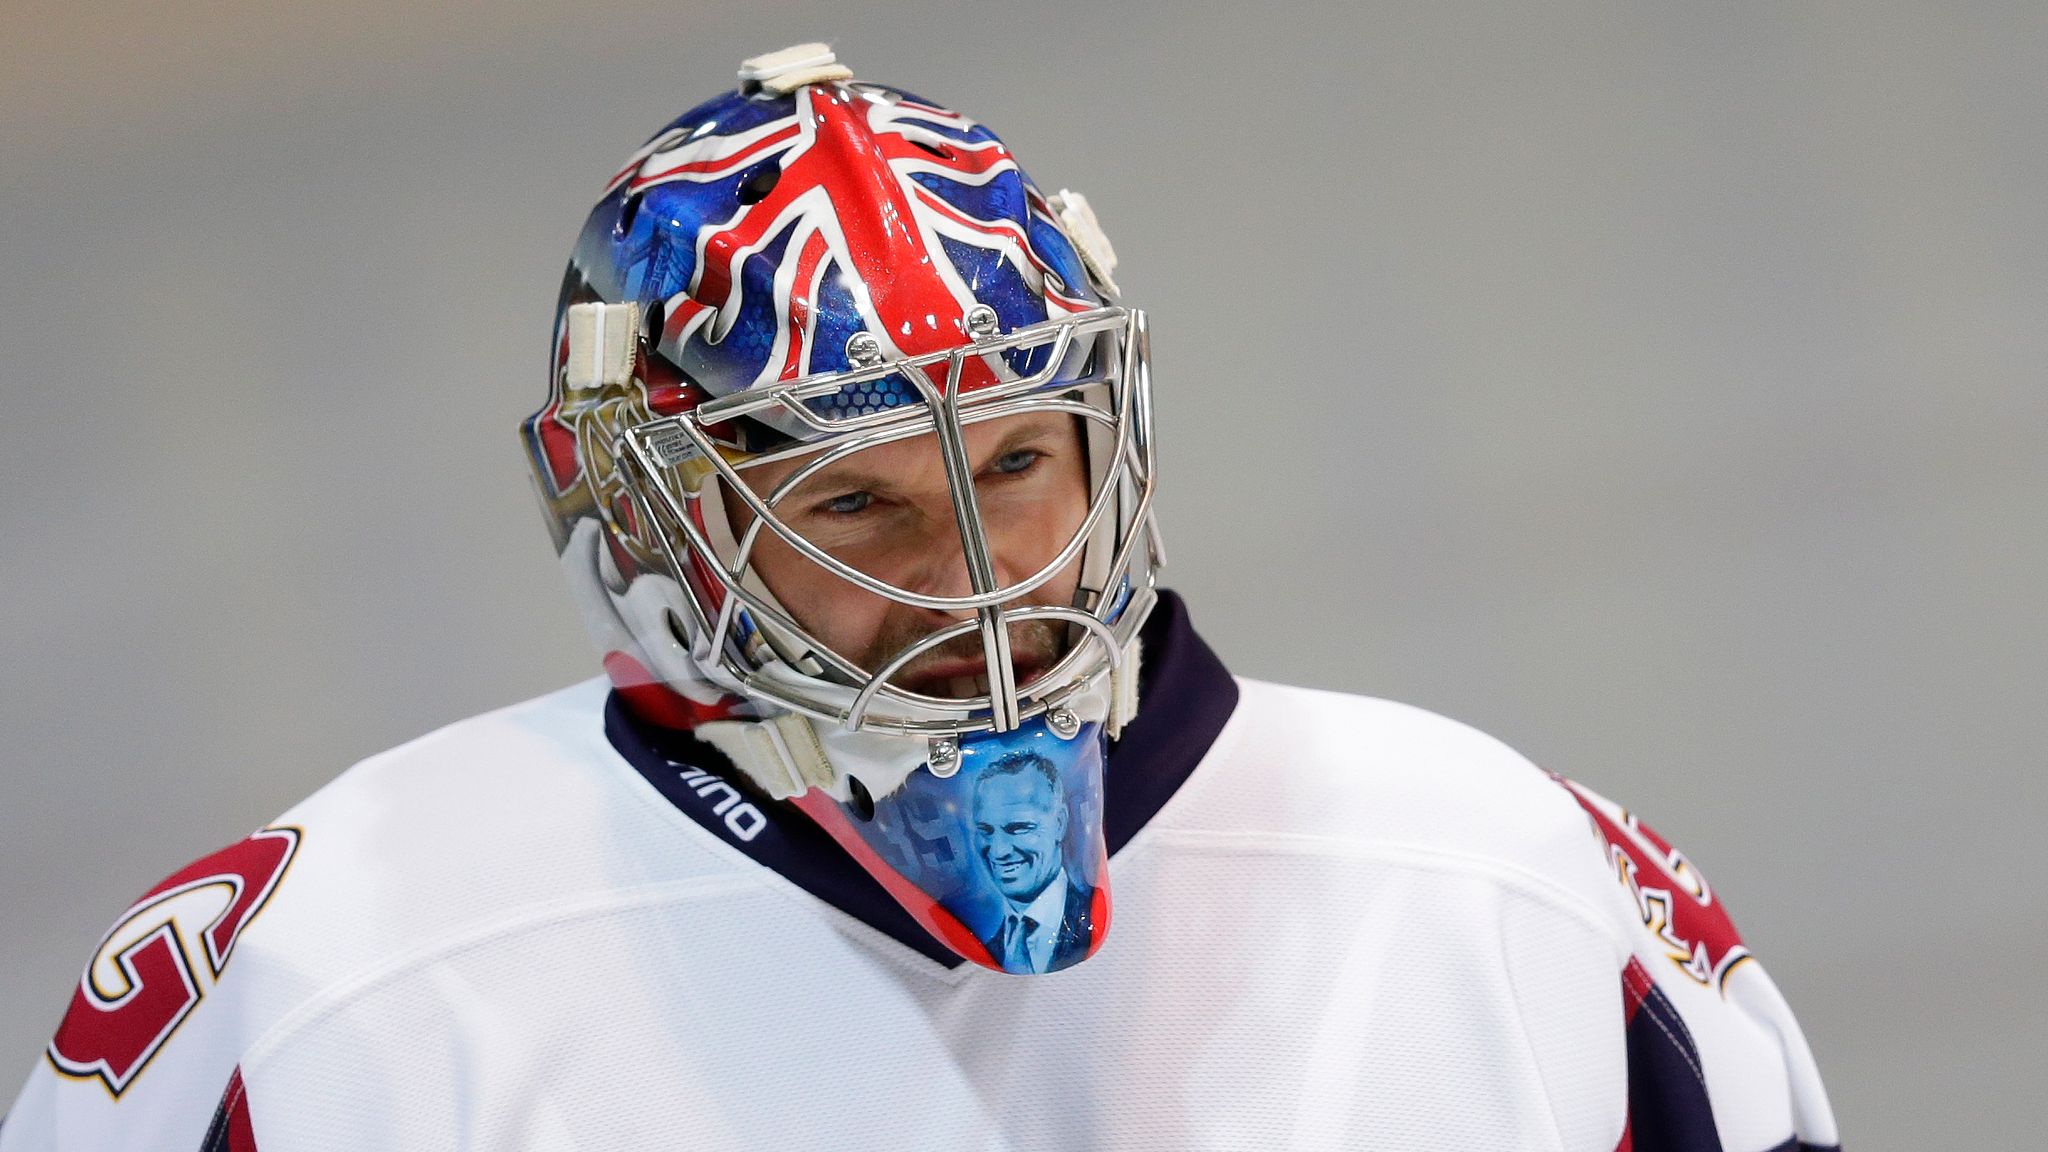 Petr Cech fulfils childhood dream in ice hockey debut for Guildford Phoenix  | Ice Hockey News | Sky Sports